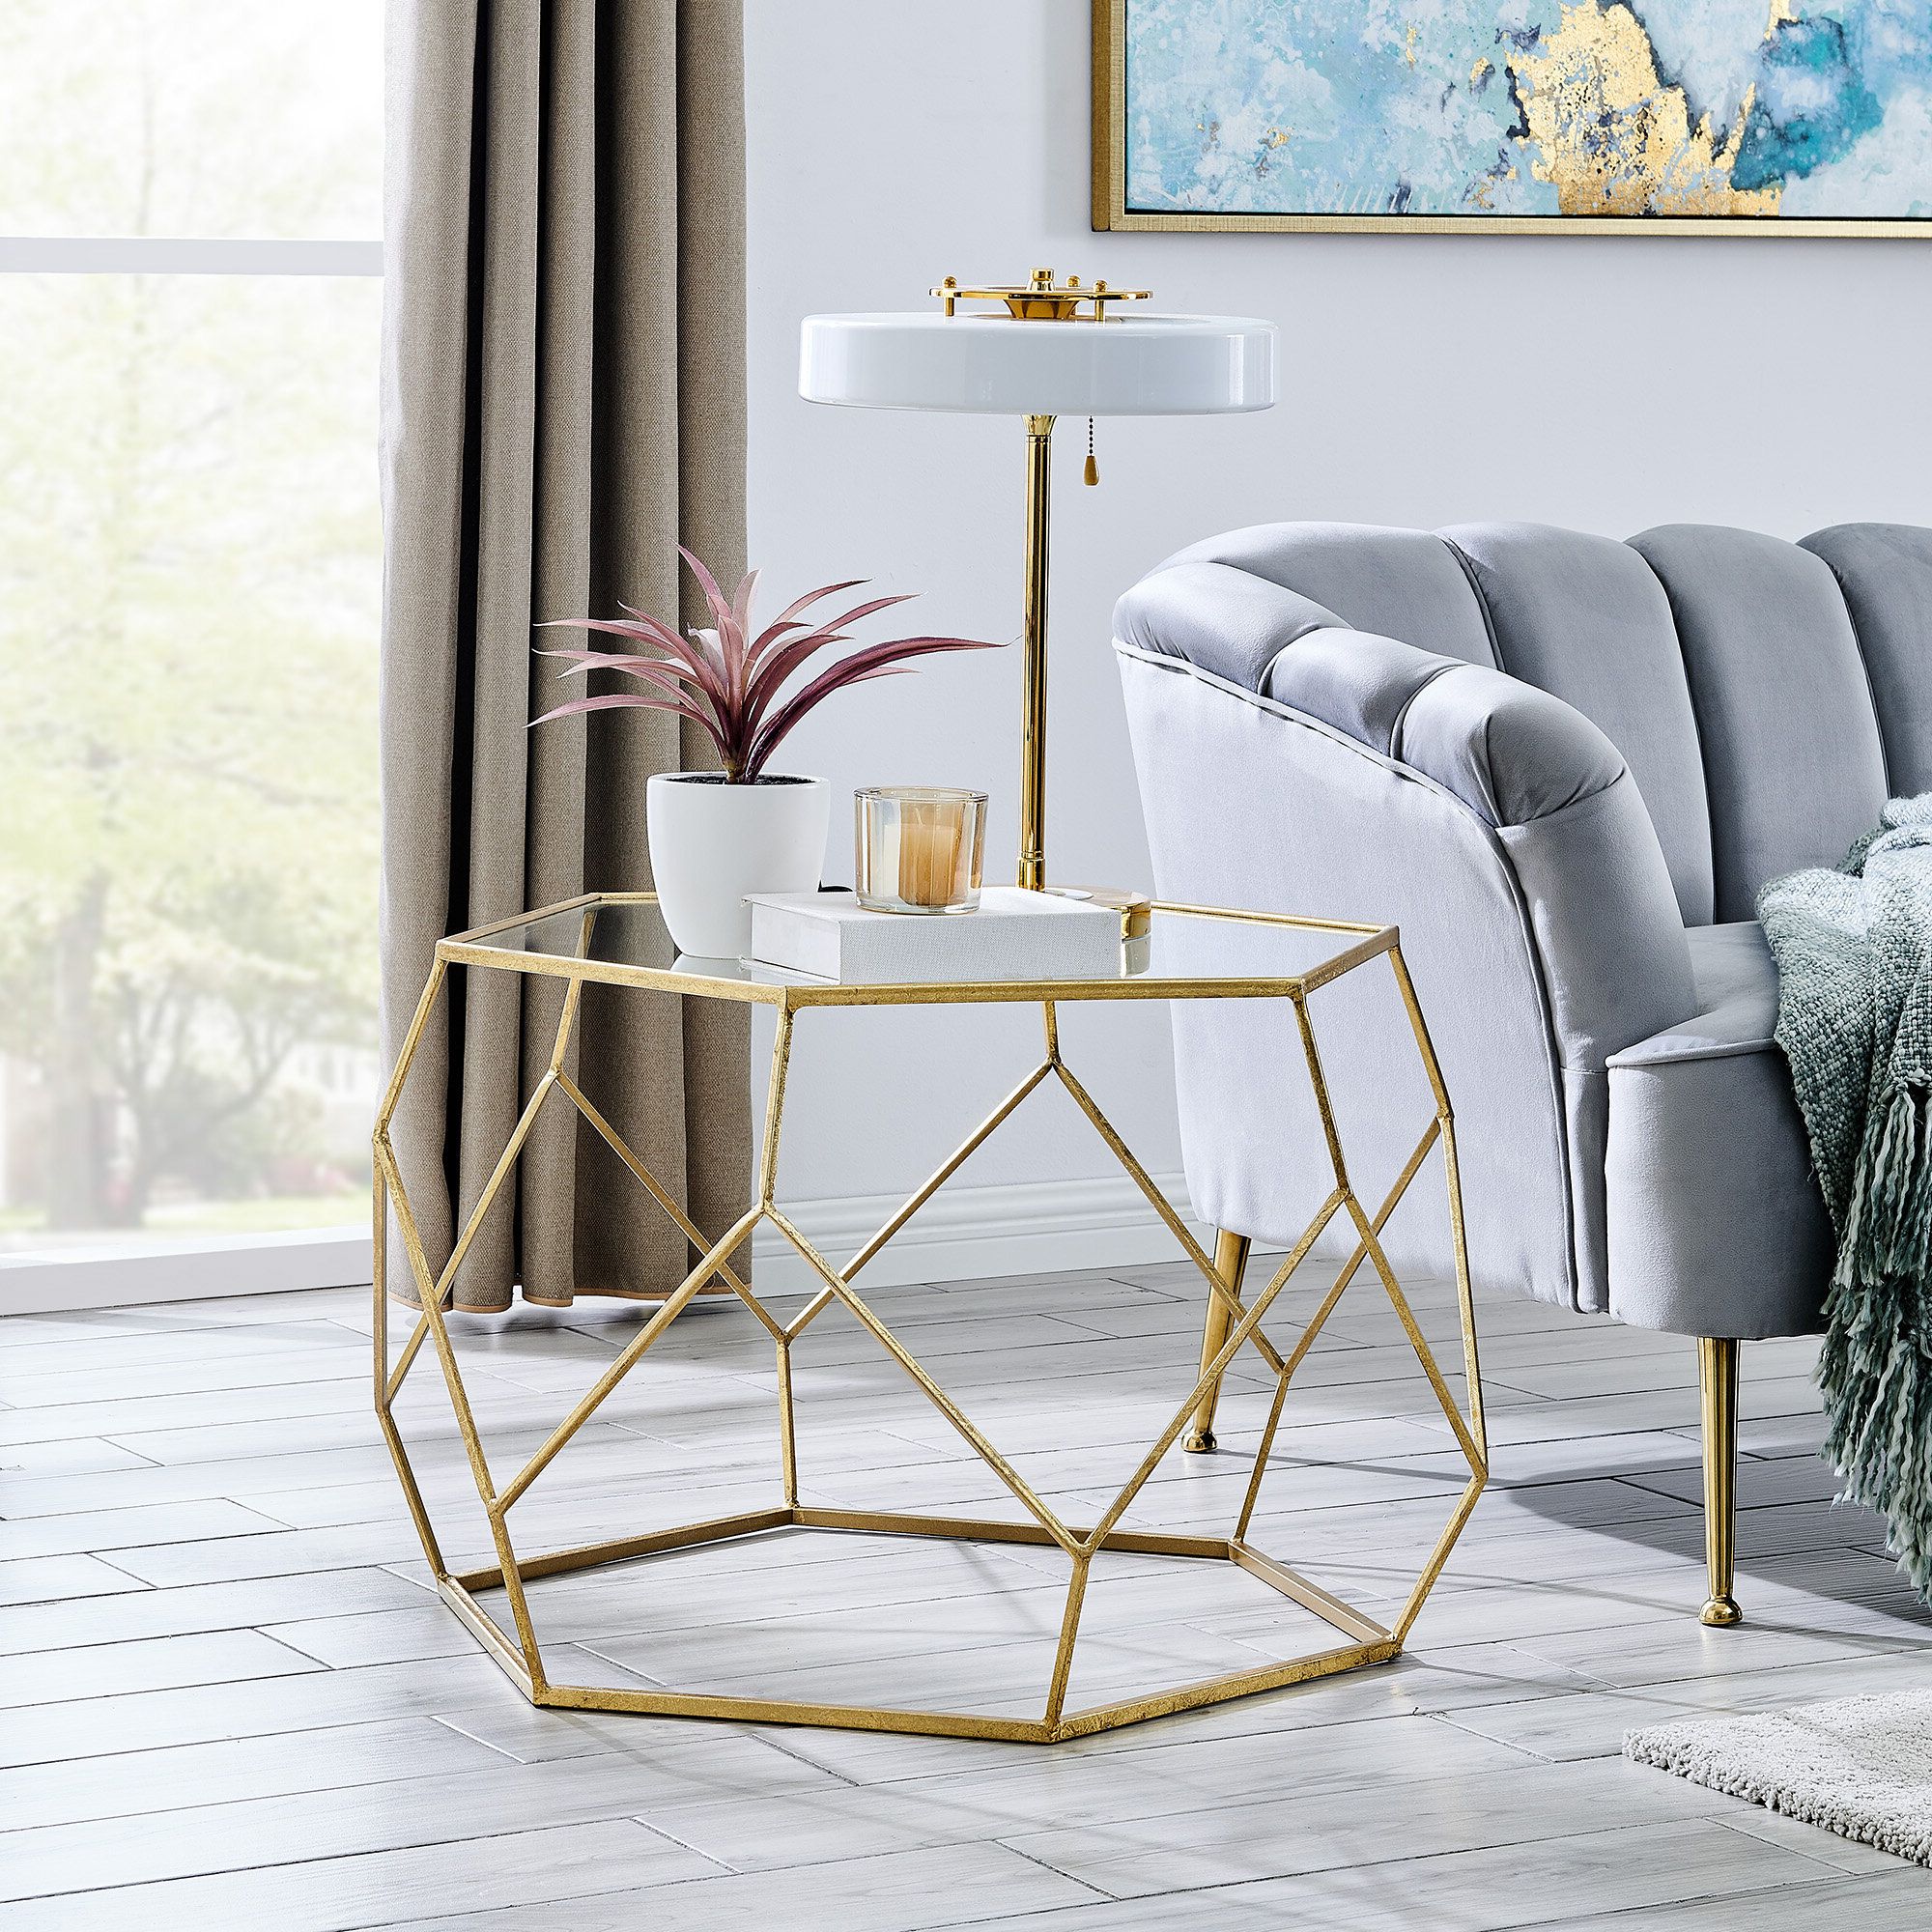 Wayfair With Regard To Most Recent Geometric White Coffee Tables (View 16 of 20)